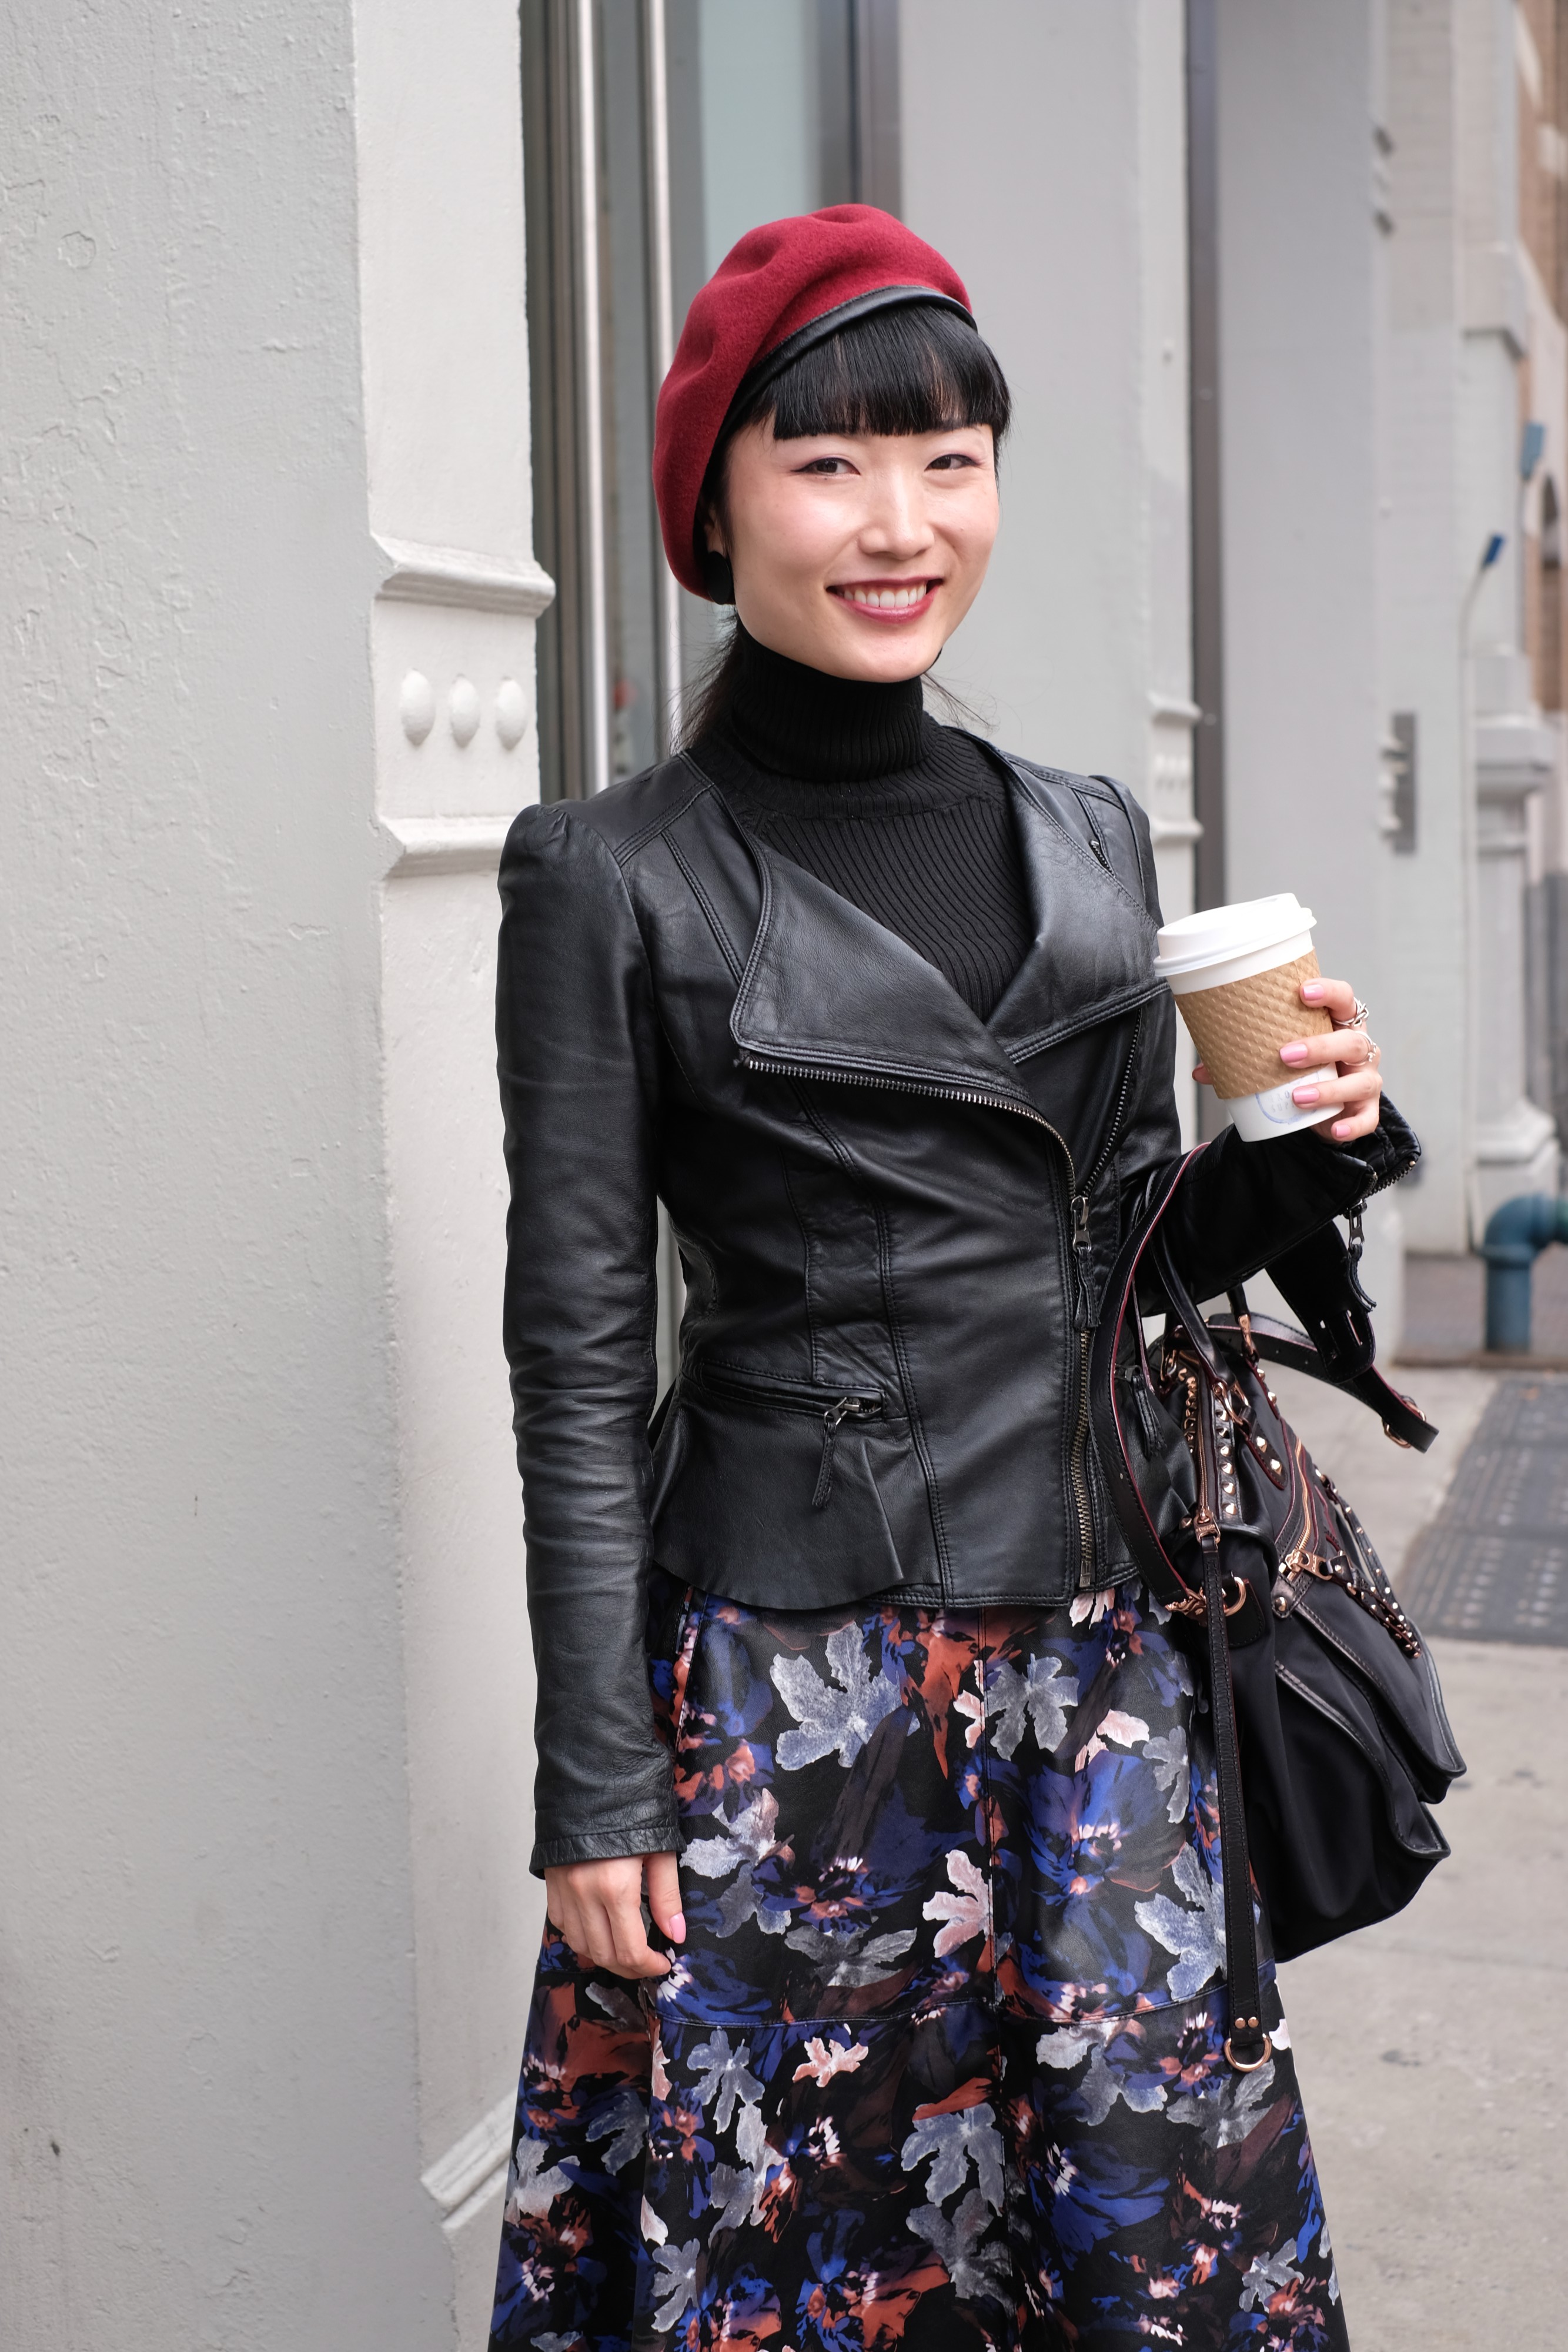 Japanese girl in floral dress and black jacket